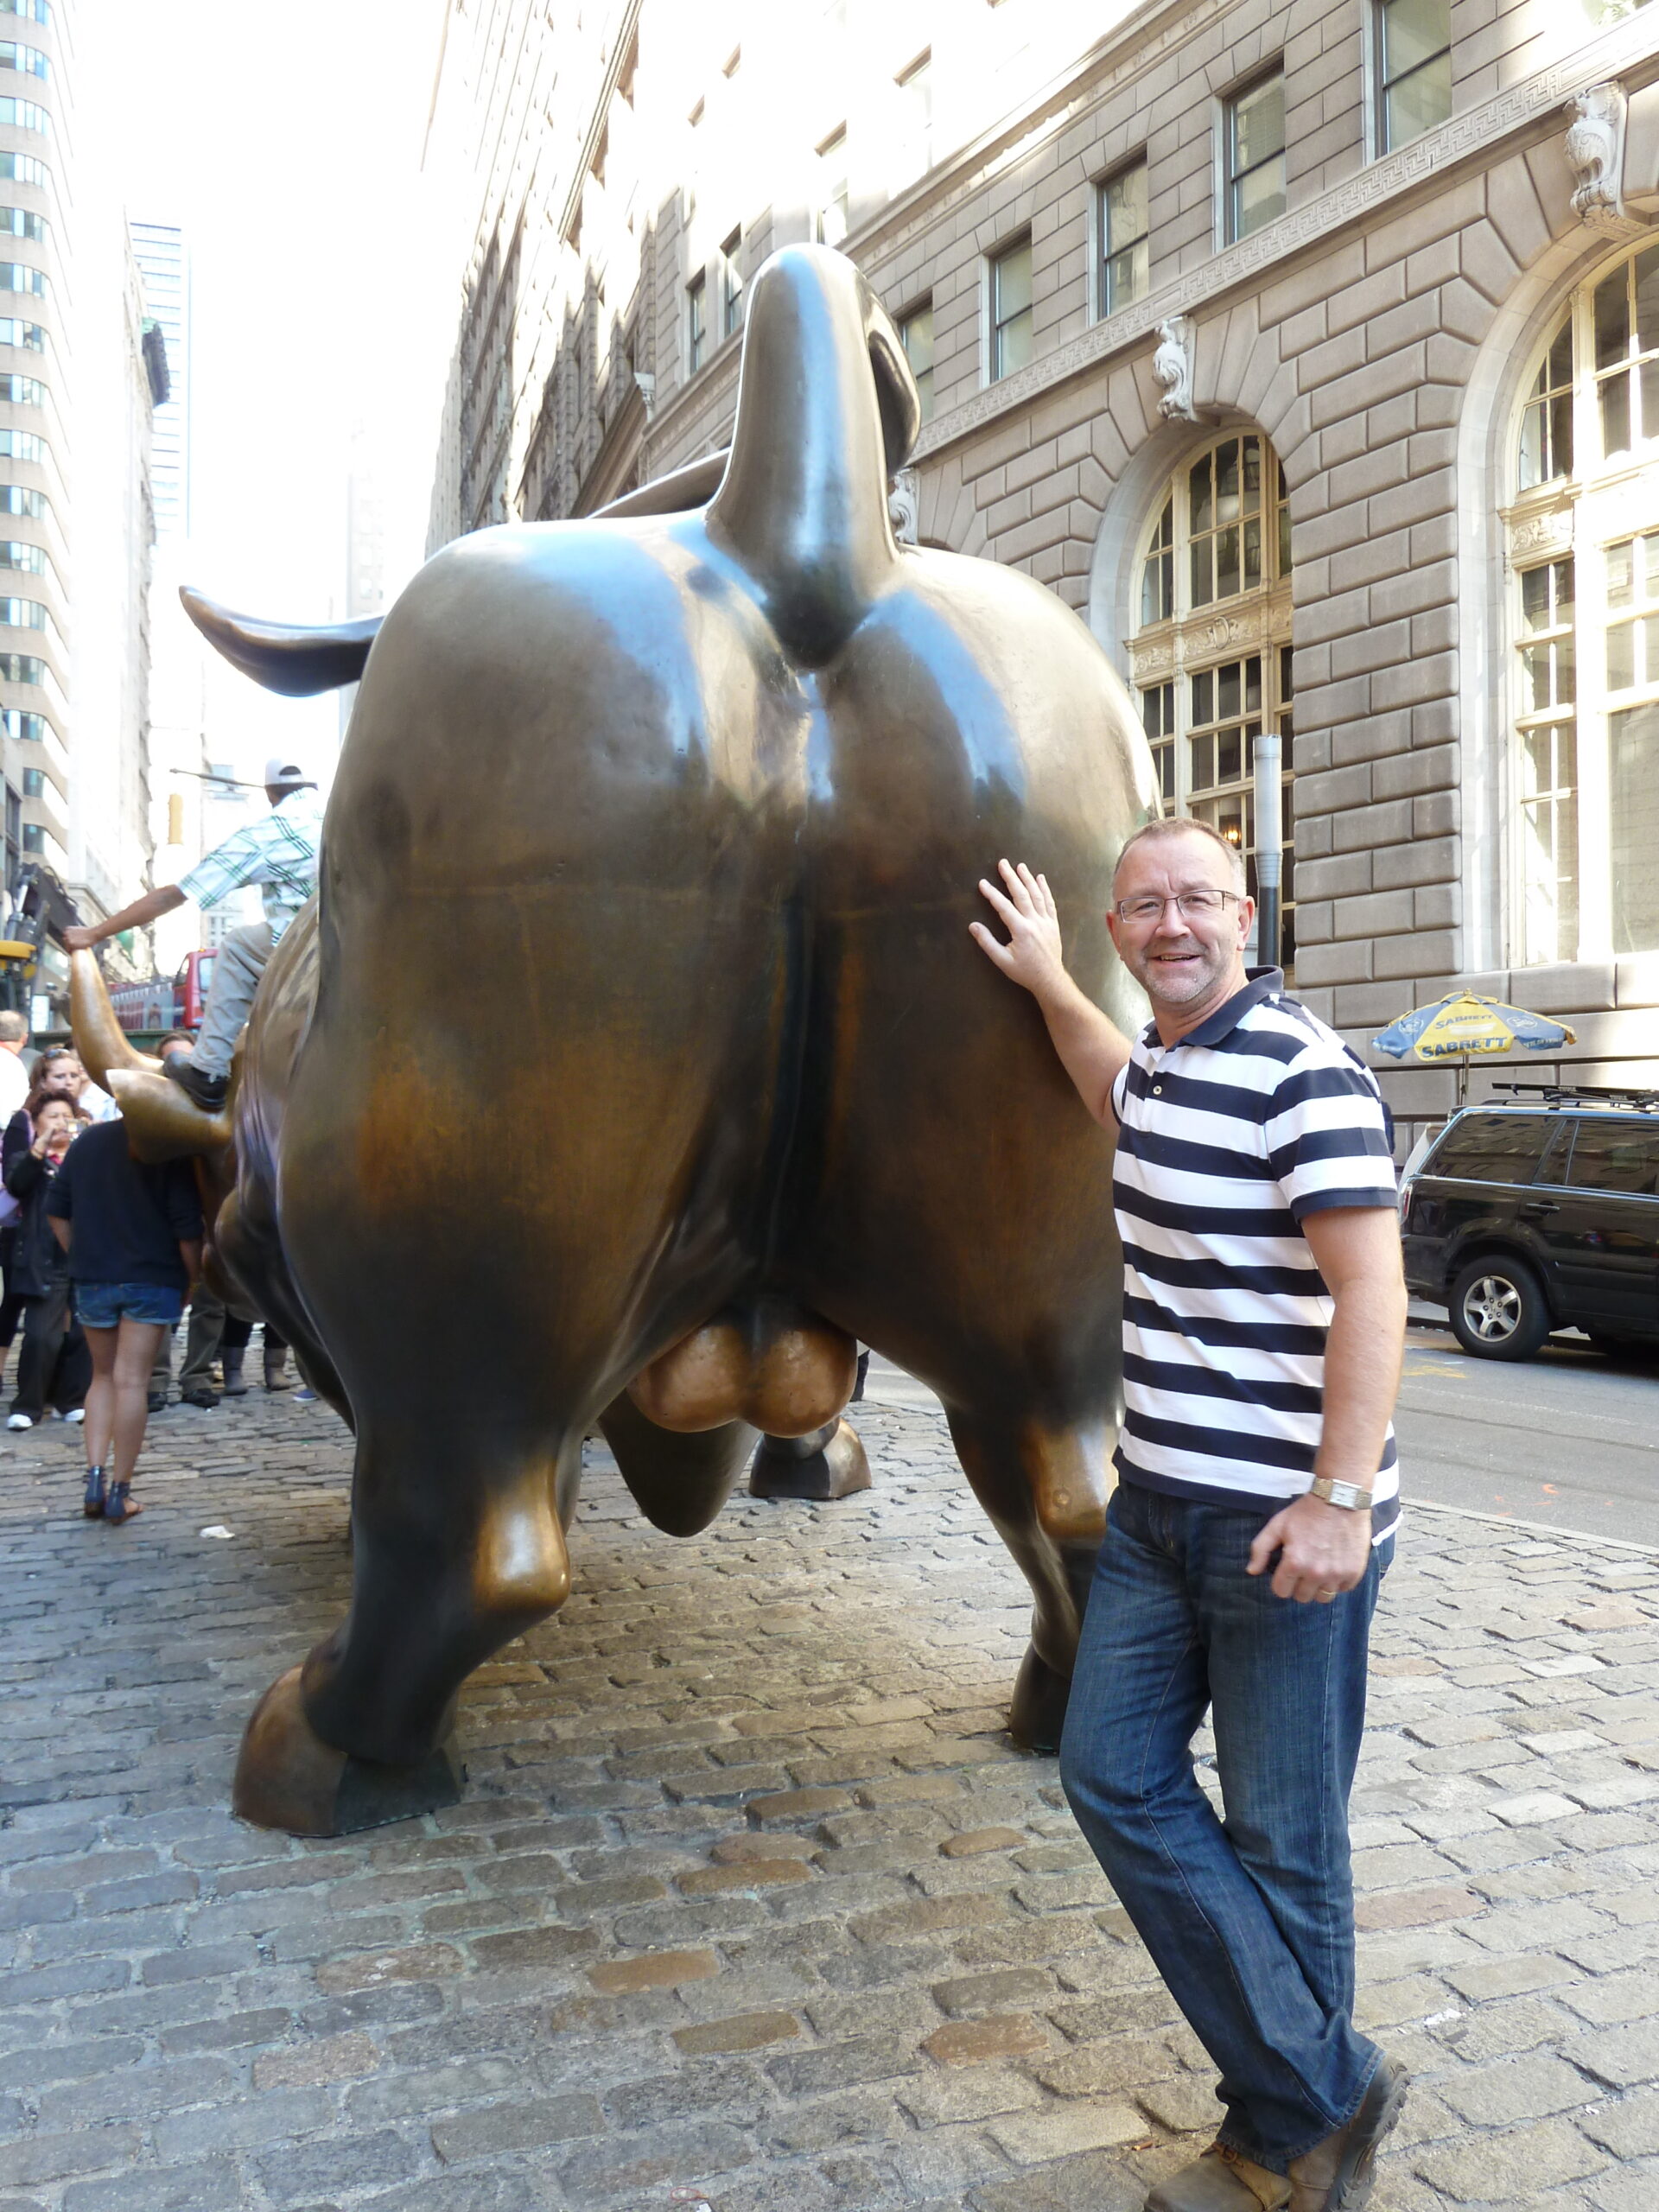 Chris visits Charging Bull near the New York Stock Exchange on Wall Street.